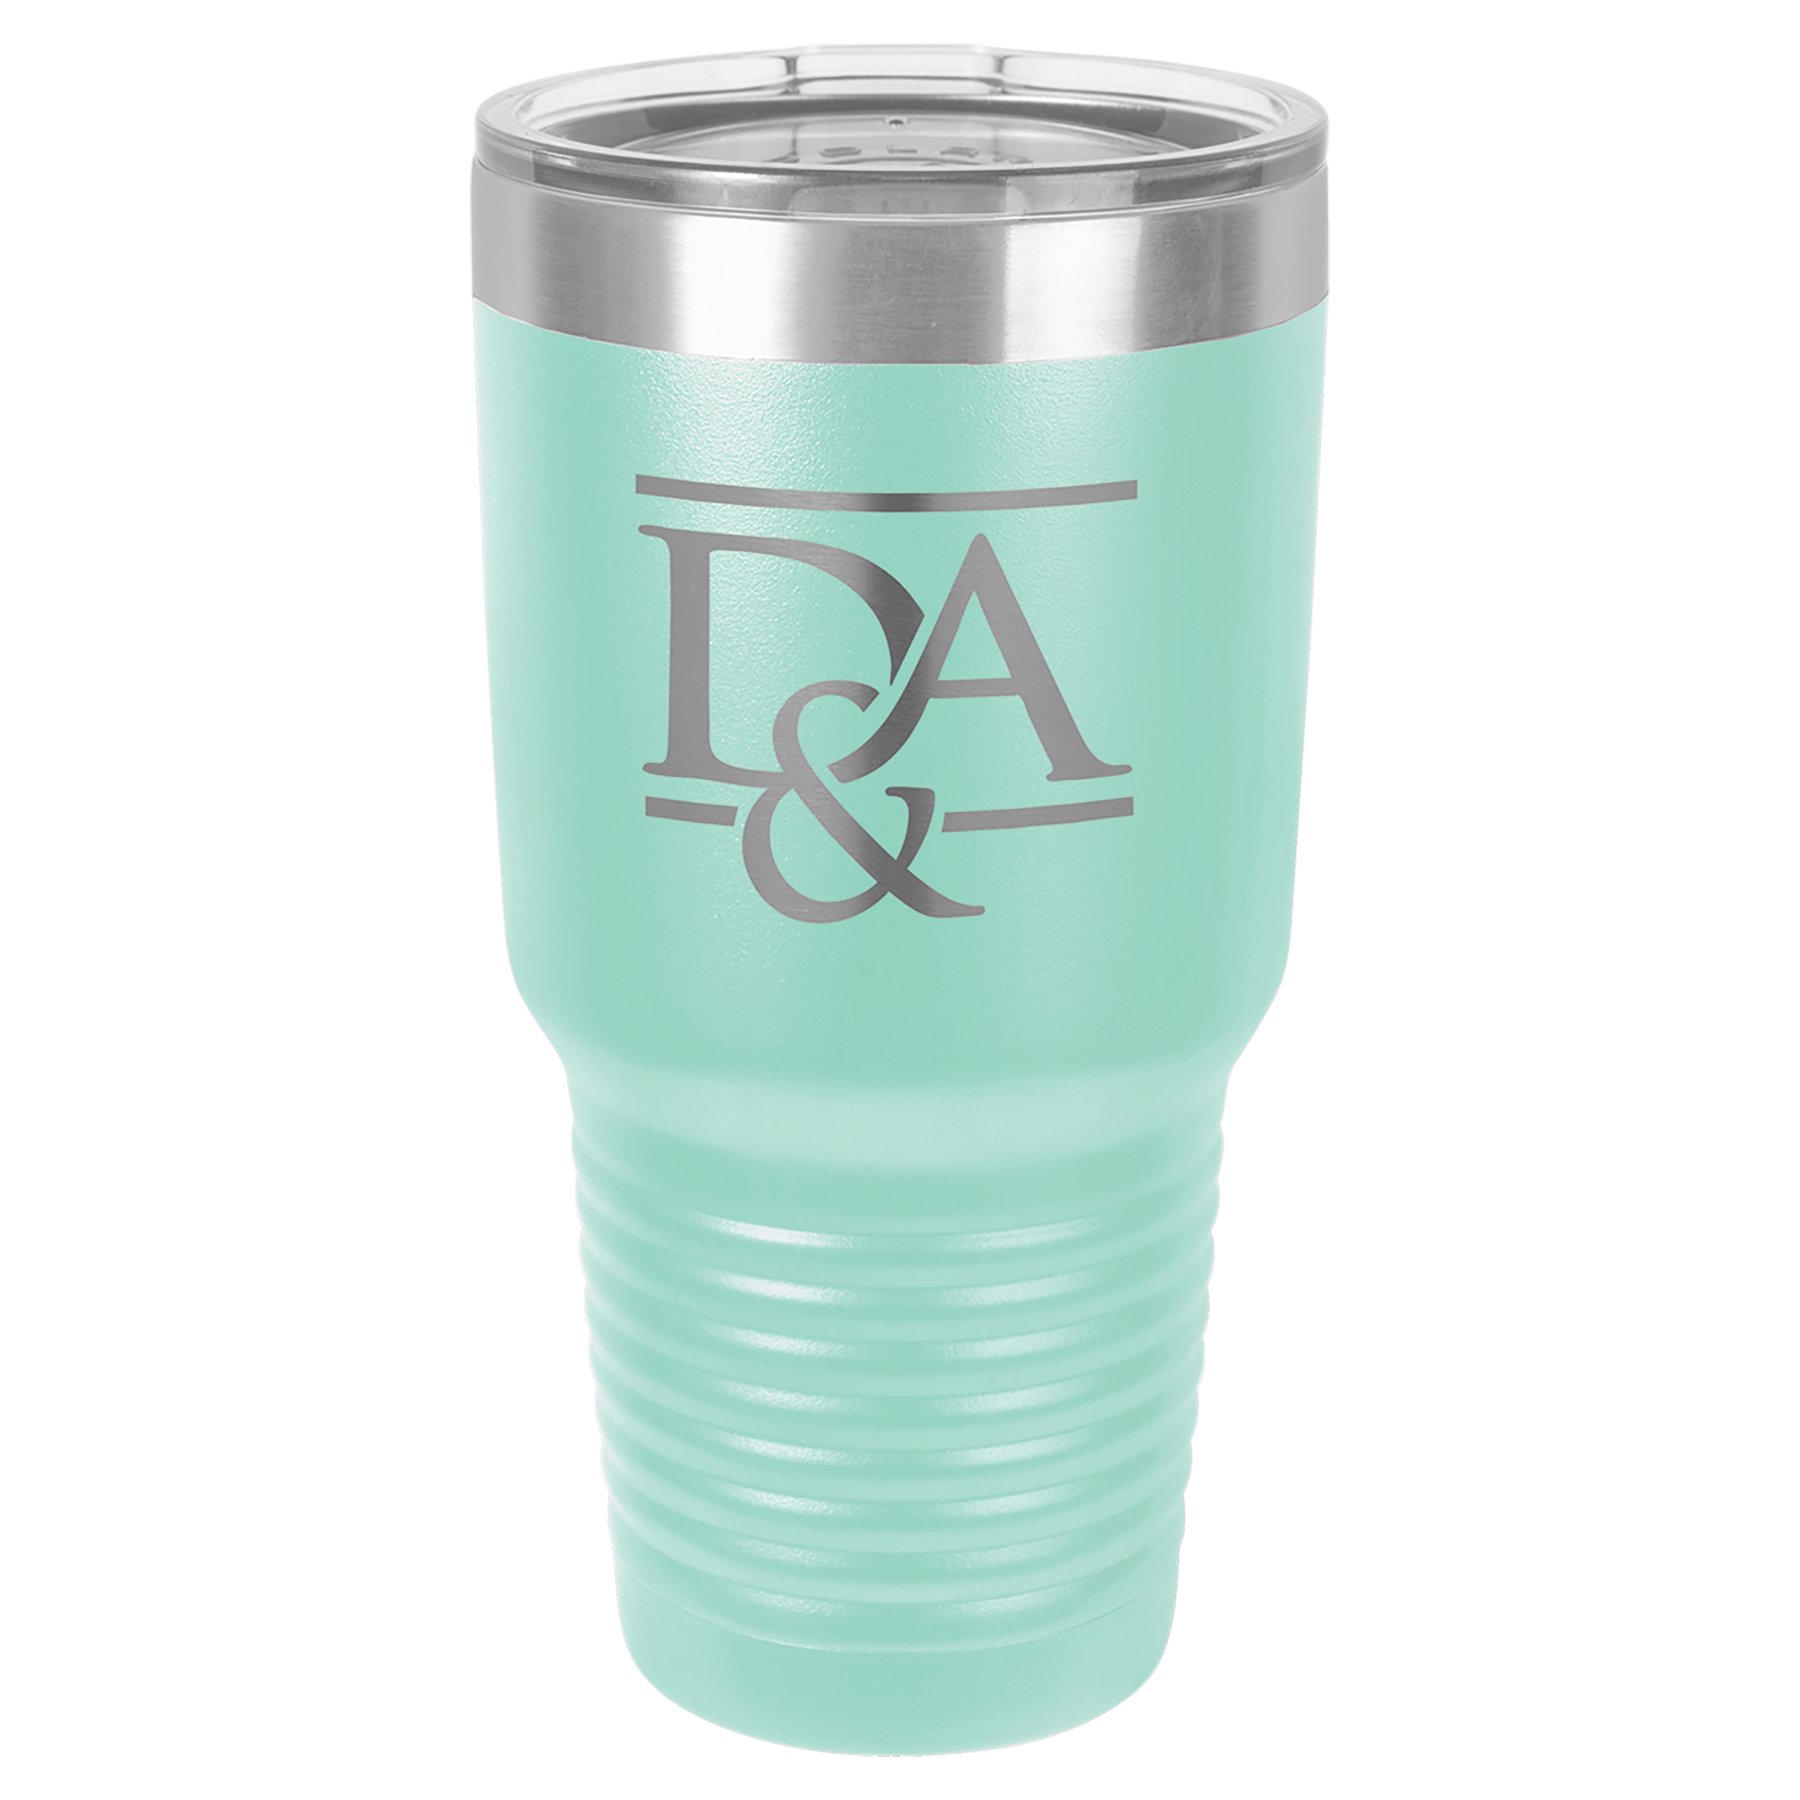 https://samsengravingandgifts.com/wp-content/uploads/2023/08/Polar-Camel-30-oz.-Teal-Ringneck-Vacuum-Insulated-Tumbler-with-Clear-Lid-Tailored-Laser-Etching-for-Personalized-Gifts_LTM7306.jpg